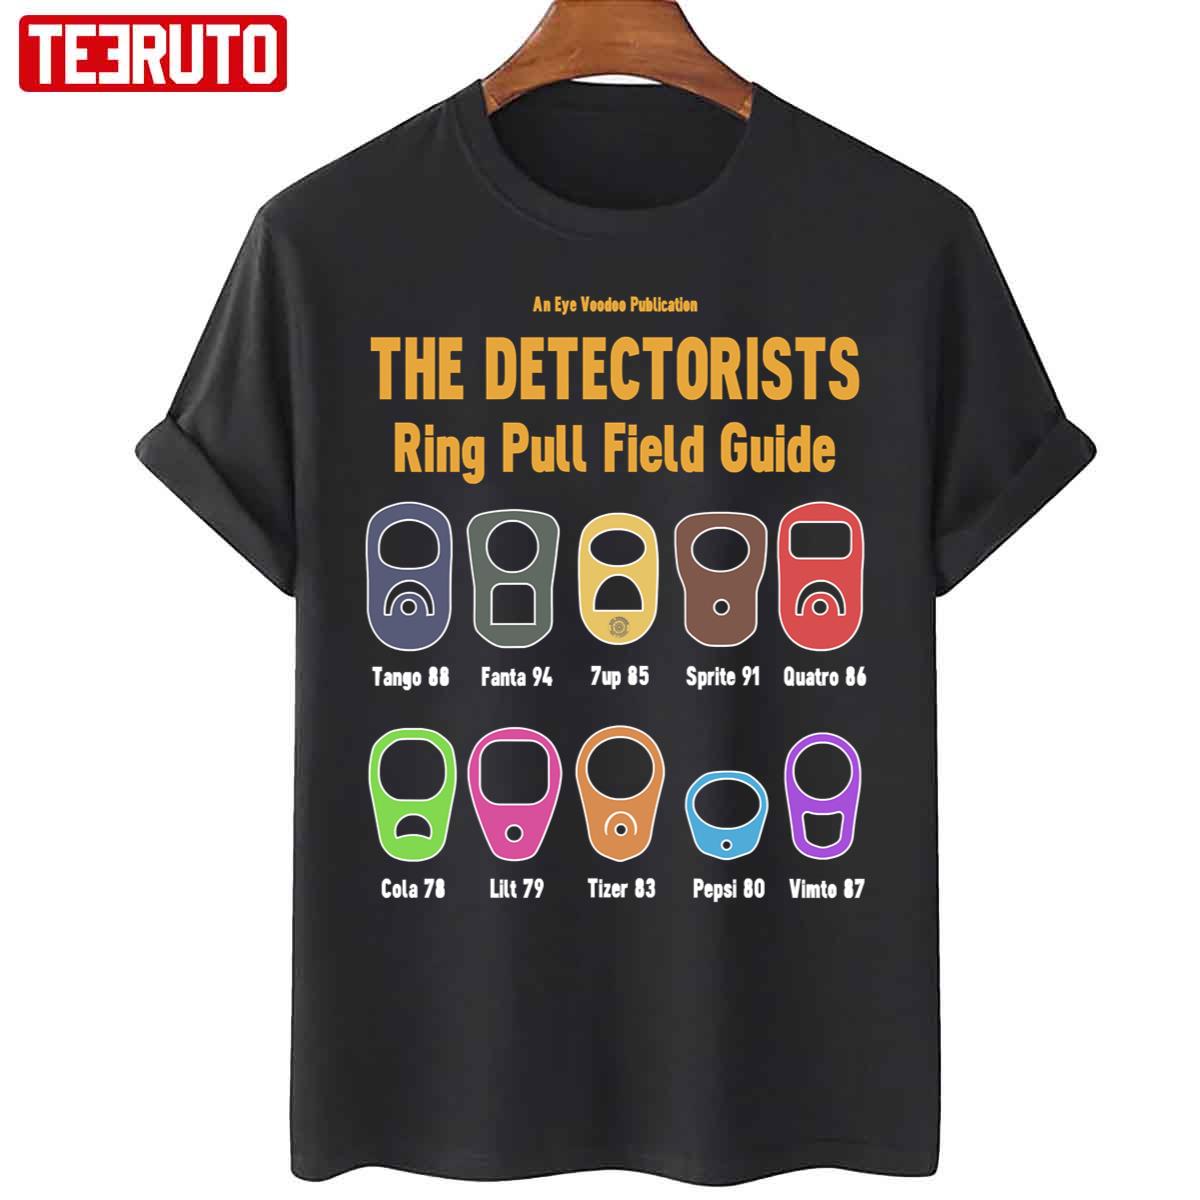 Detectorists Ring Pull Field Guide By Eye Voodoo Rainbow Unisex T-Shirt